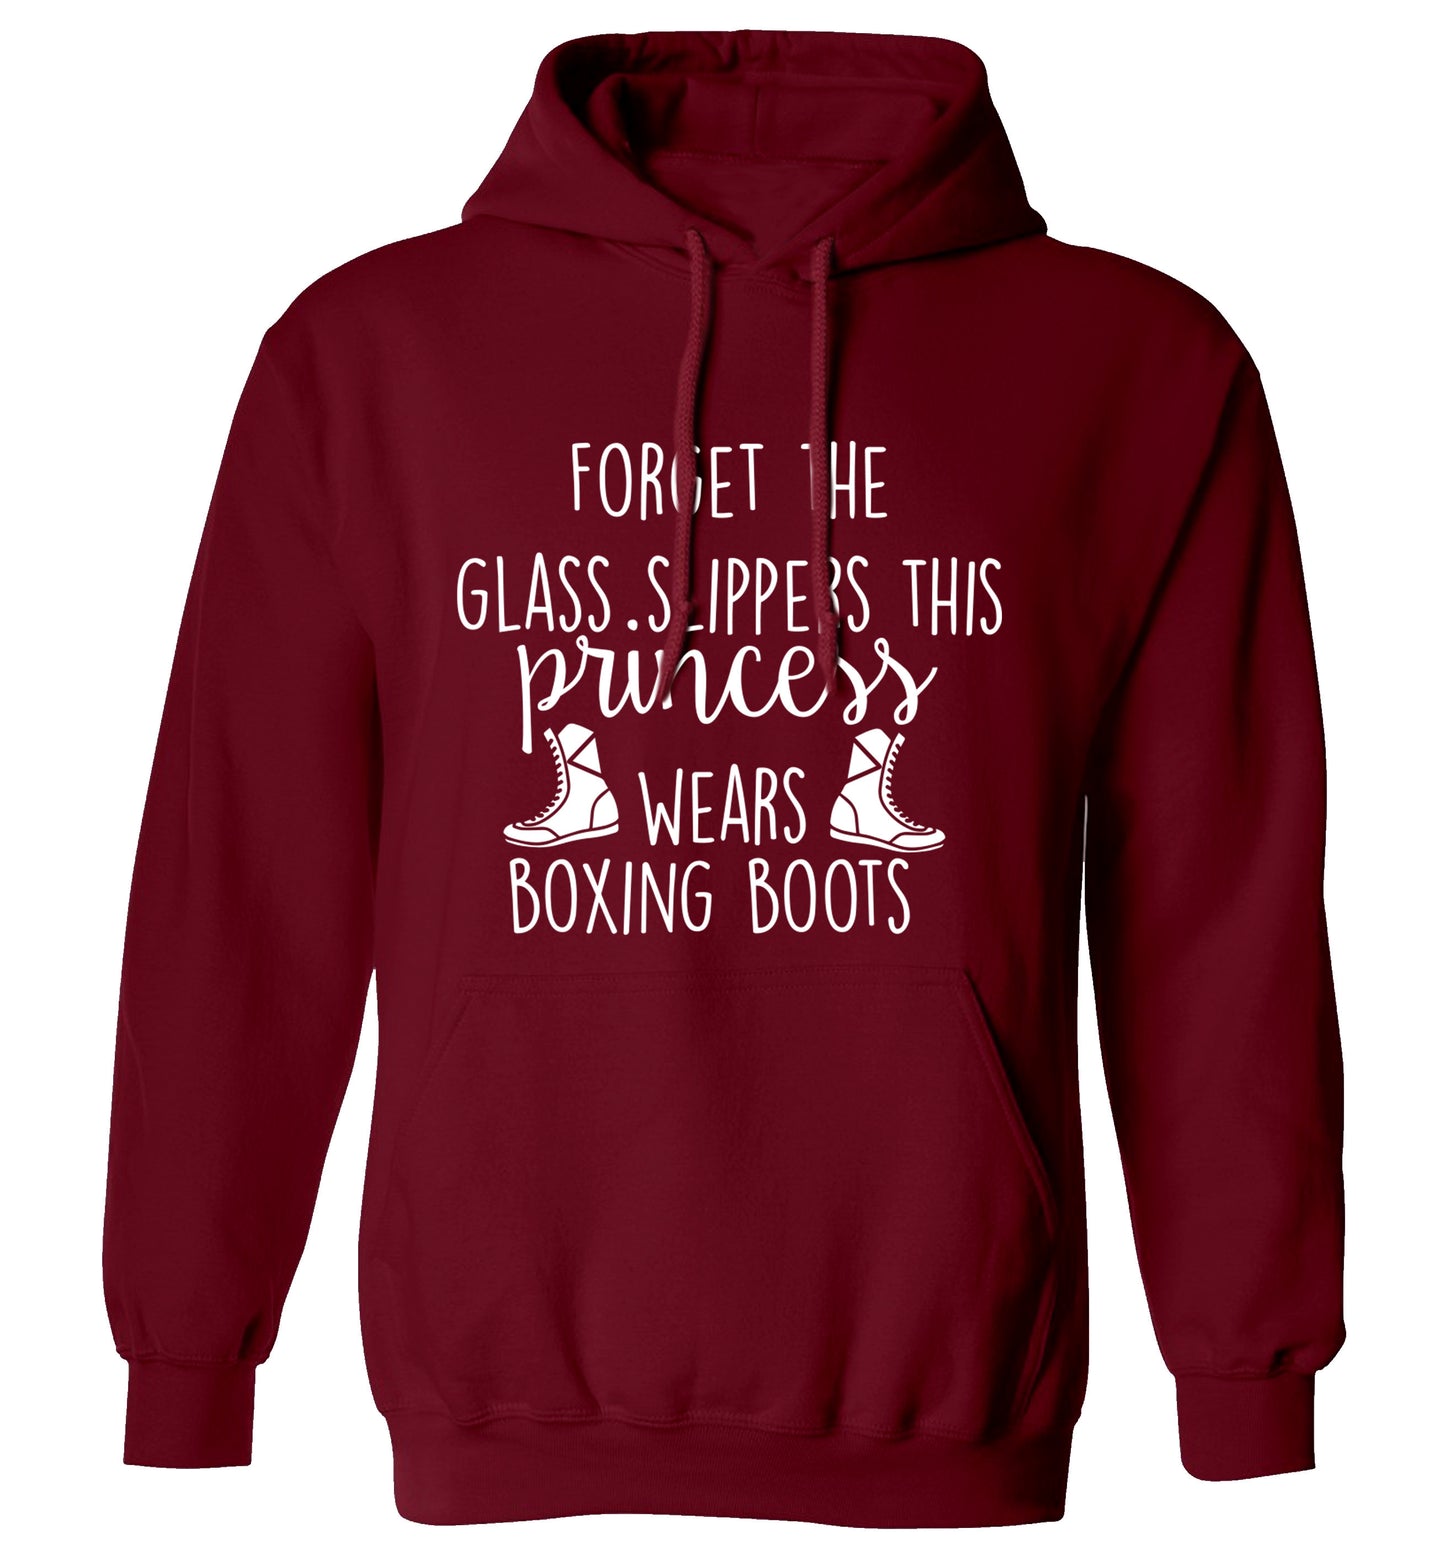 Forget the glass slippers this princess wears boxing boots adults unisex maroon hoodie 2XL